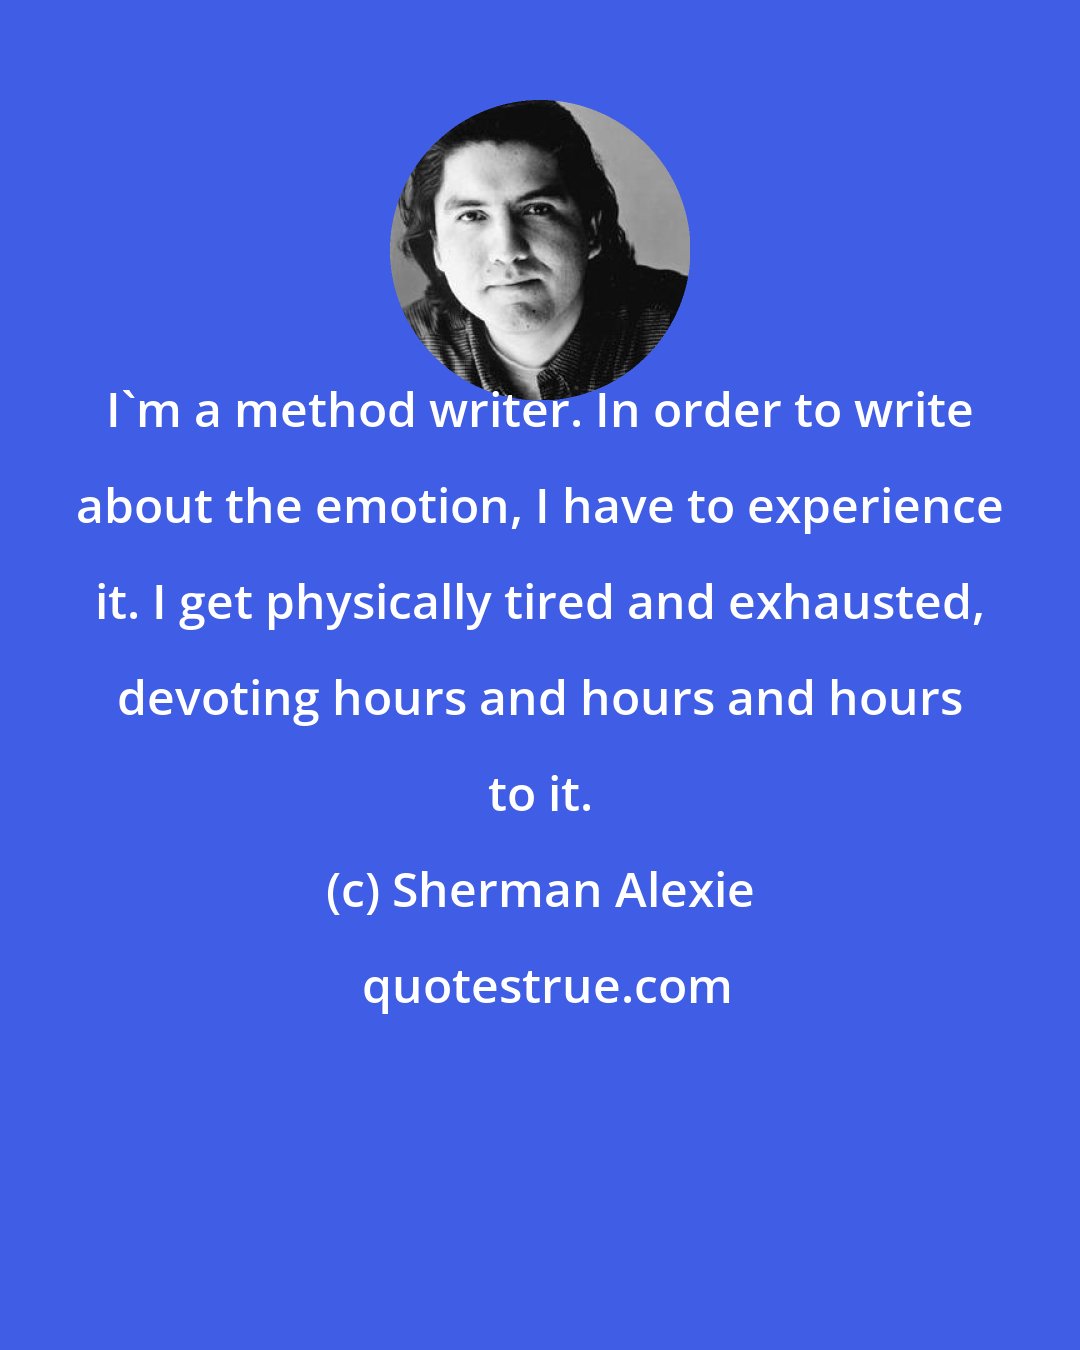 Sherman Alexie: I'm a method writer. In order to write about the emotion, I have to experience it. I get physically tired and exhausted, devoting hours and hours and hours to it.